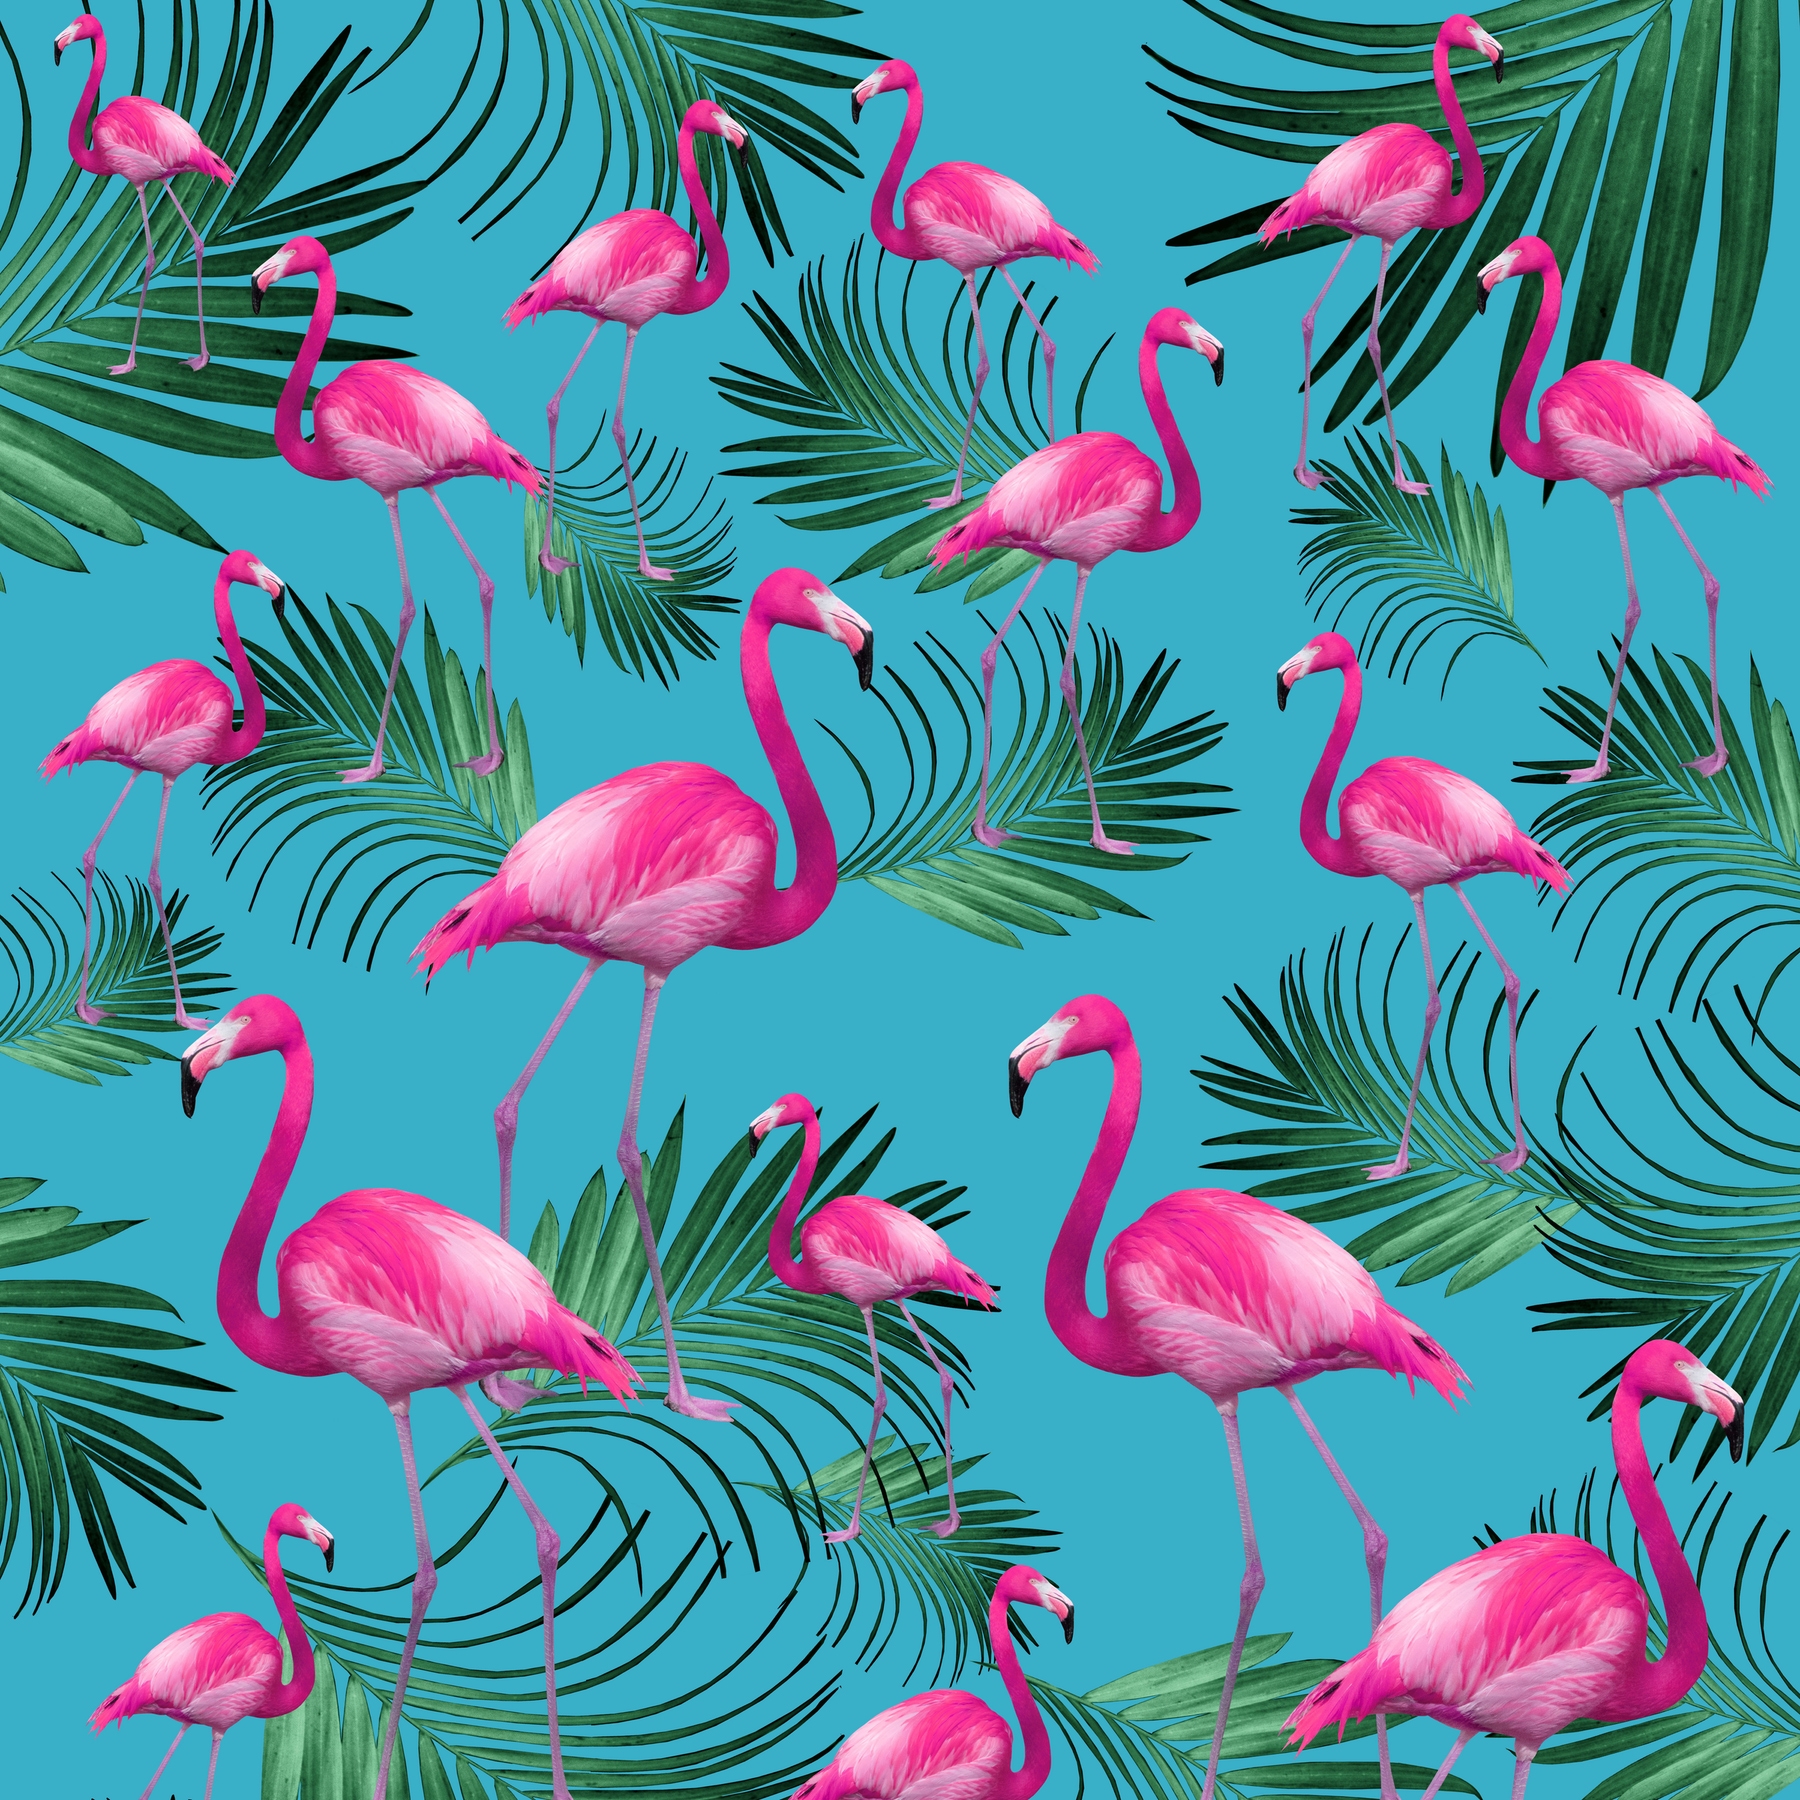 Summer Flamingo Palm Vibes 2 Wallpaper Now on Happywall